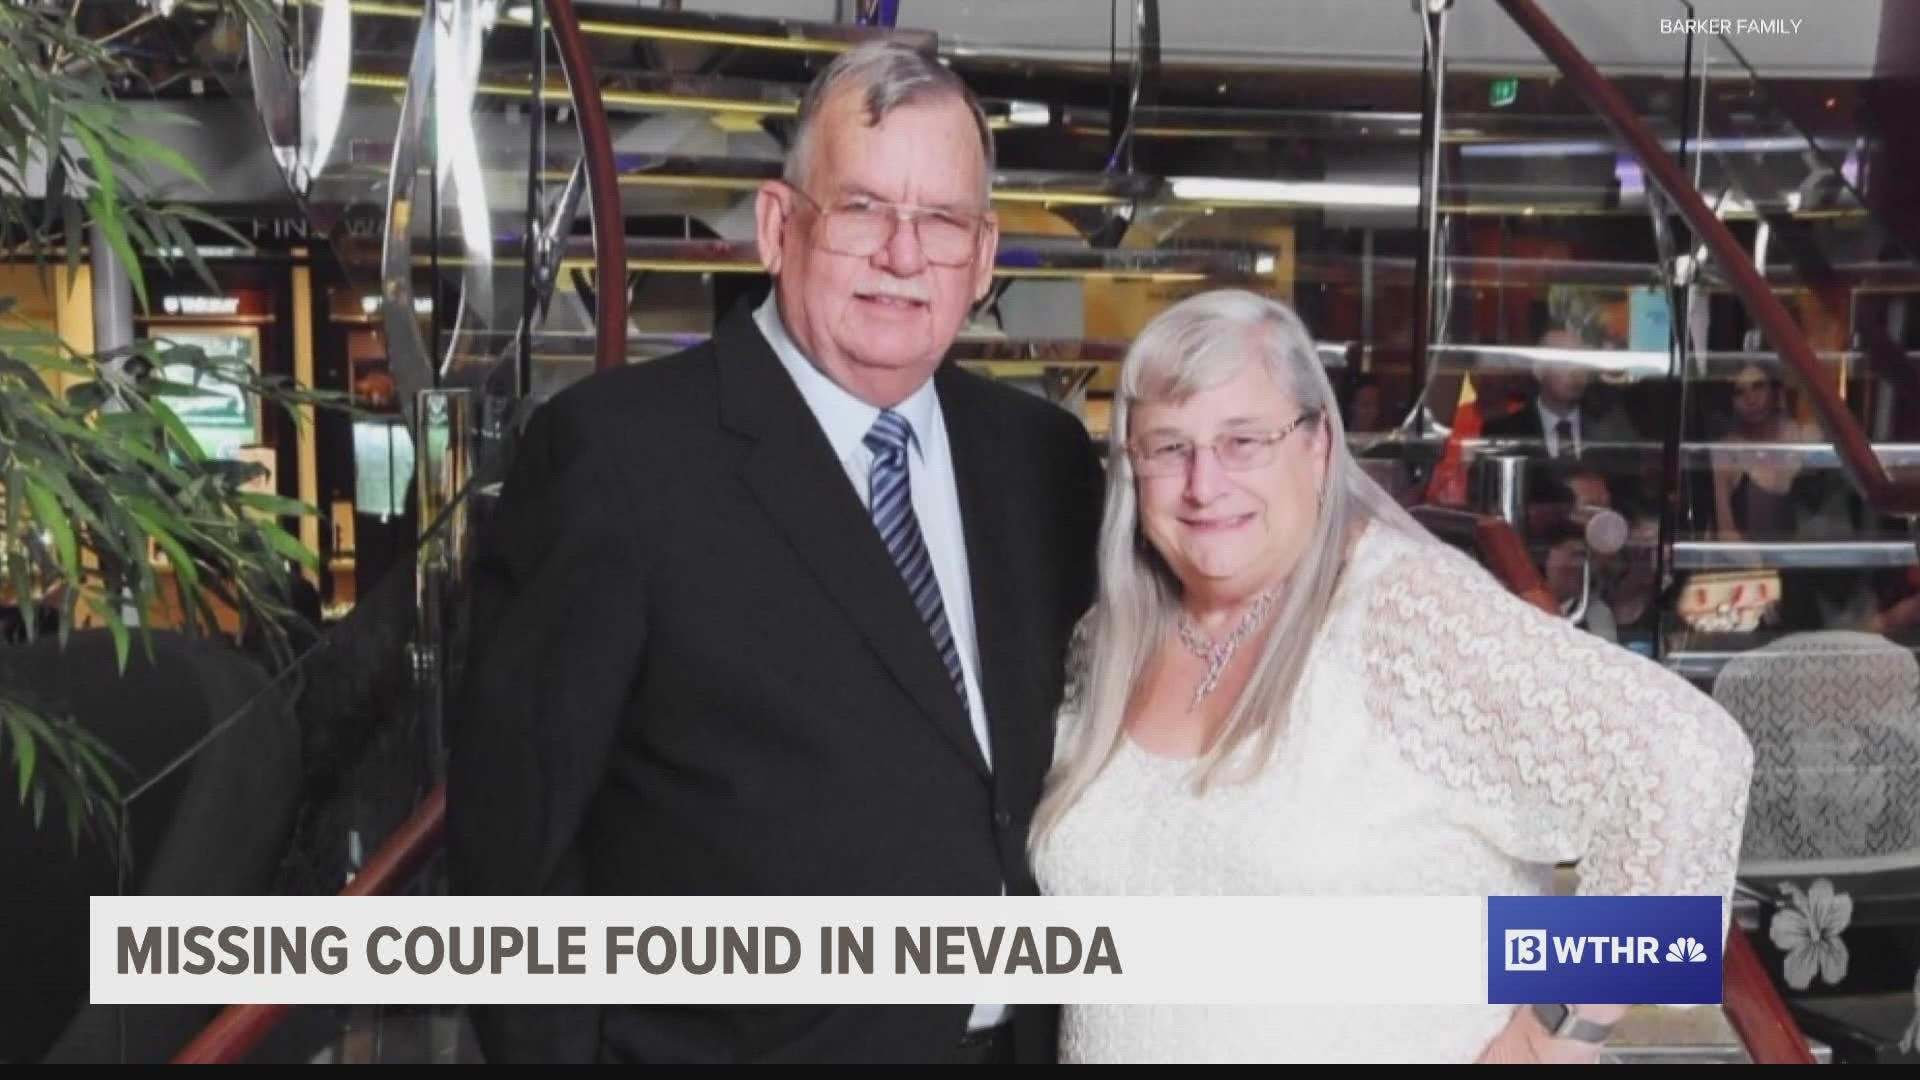 Travis Peters, a colleague at 13News, is the nephew of Ron and Bev Barker, who were missing in Nevada for more than a week.